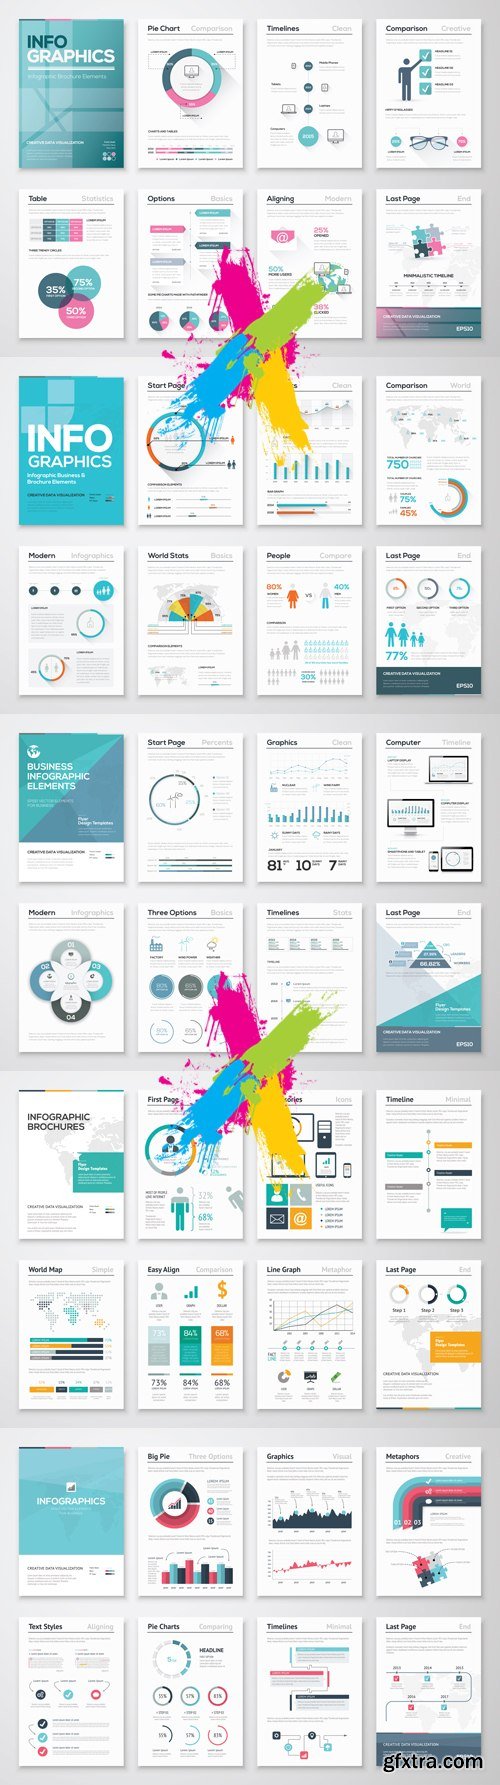 Infographic Templates Vector Collection